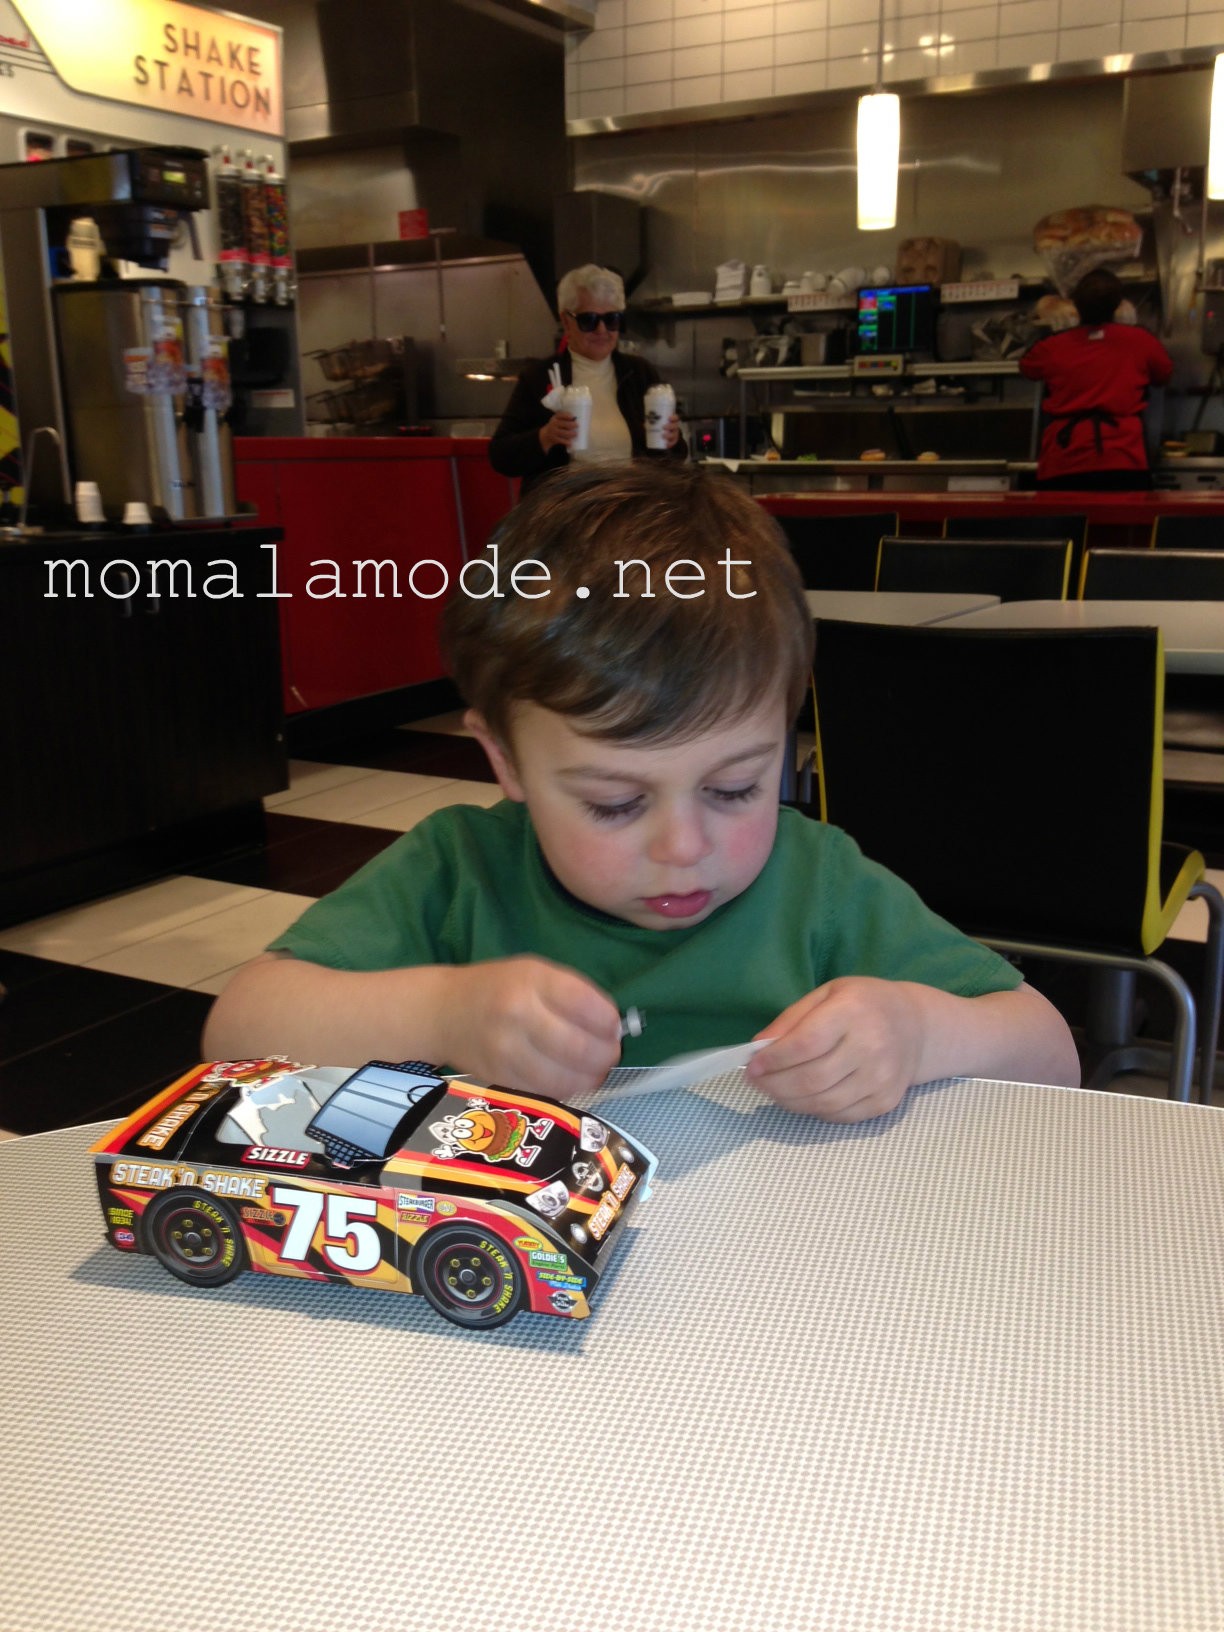 Roc at work with his stickers and car